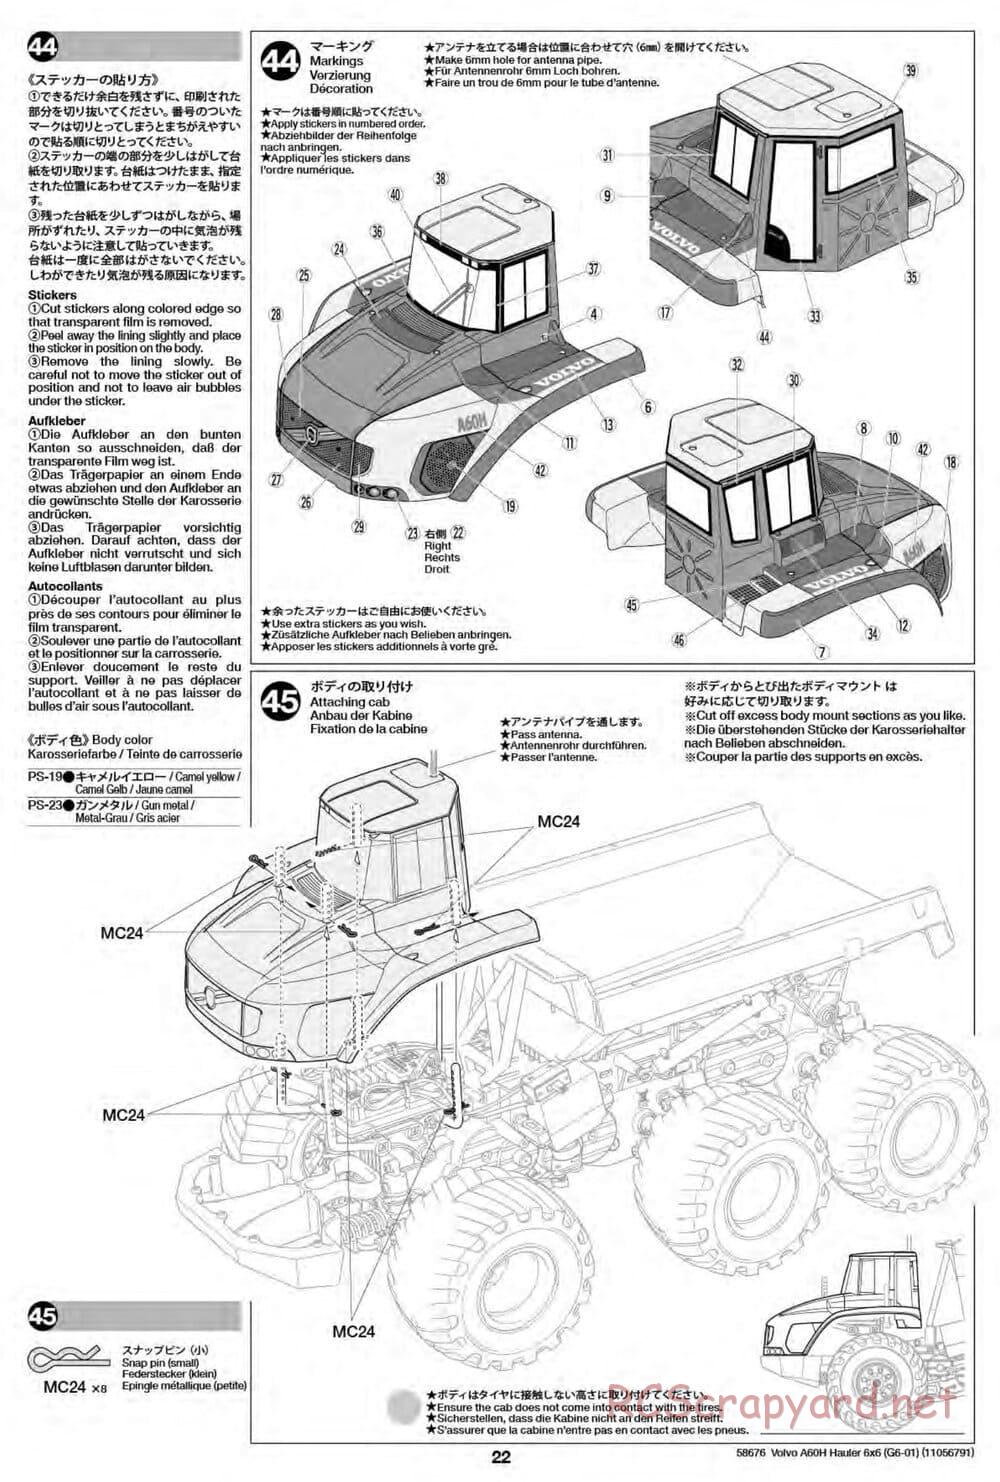 Tamiya - Volvo A60H Dump Truck 6x6 - G6-01 Chassis - Manual - Page 21